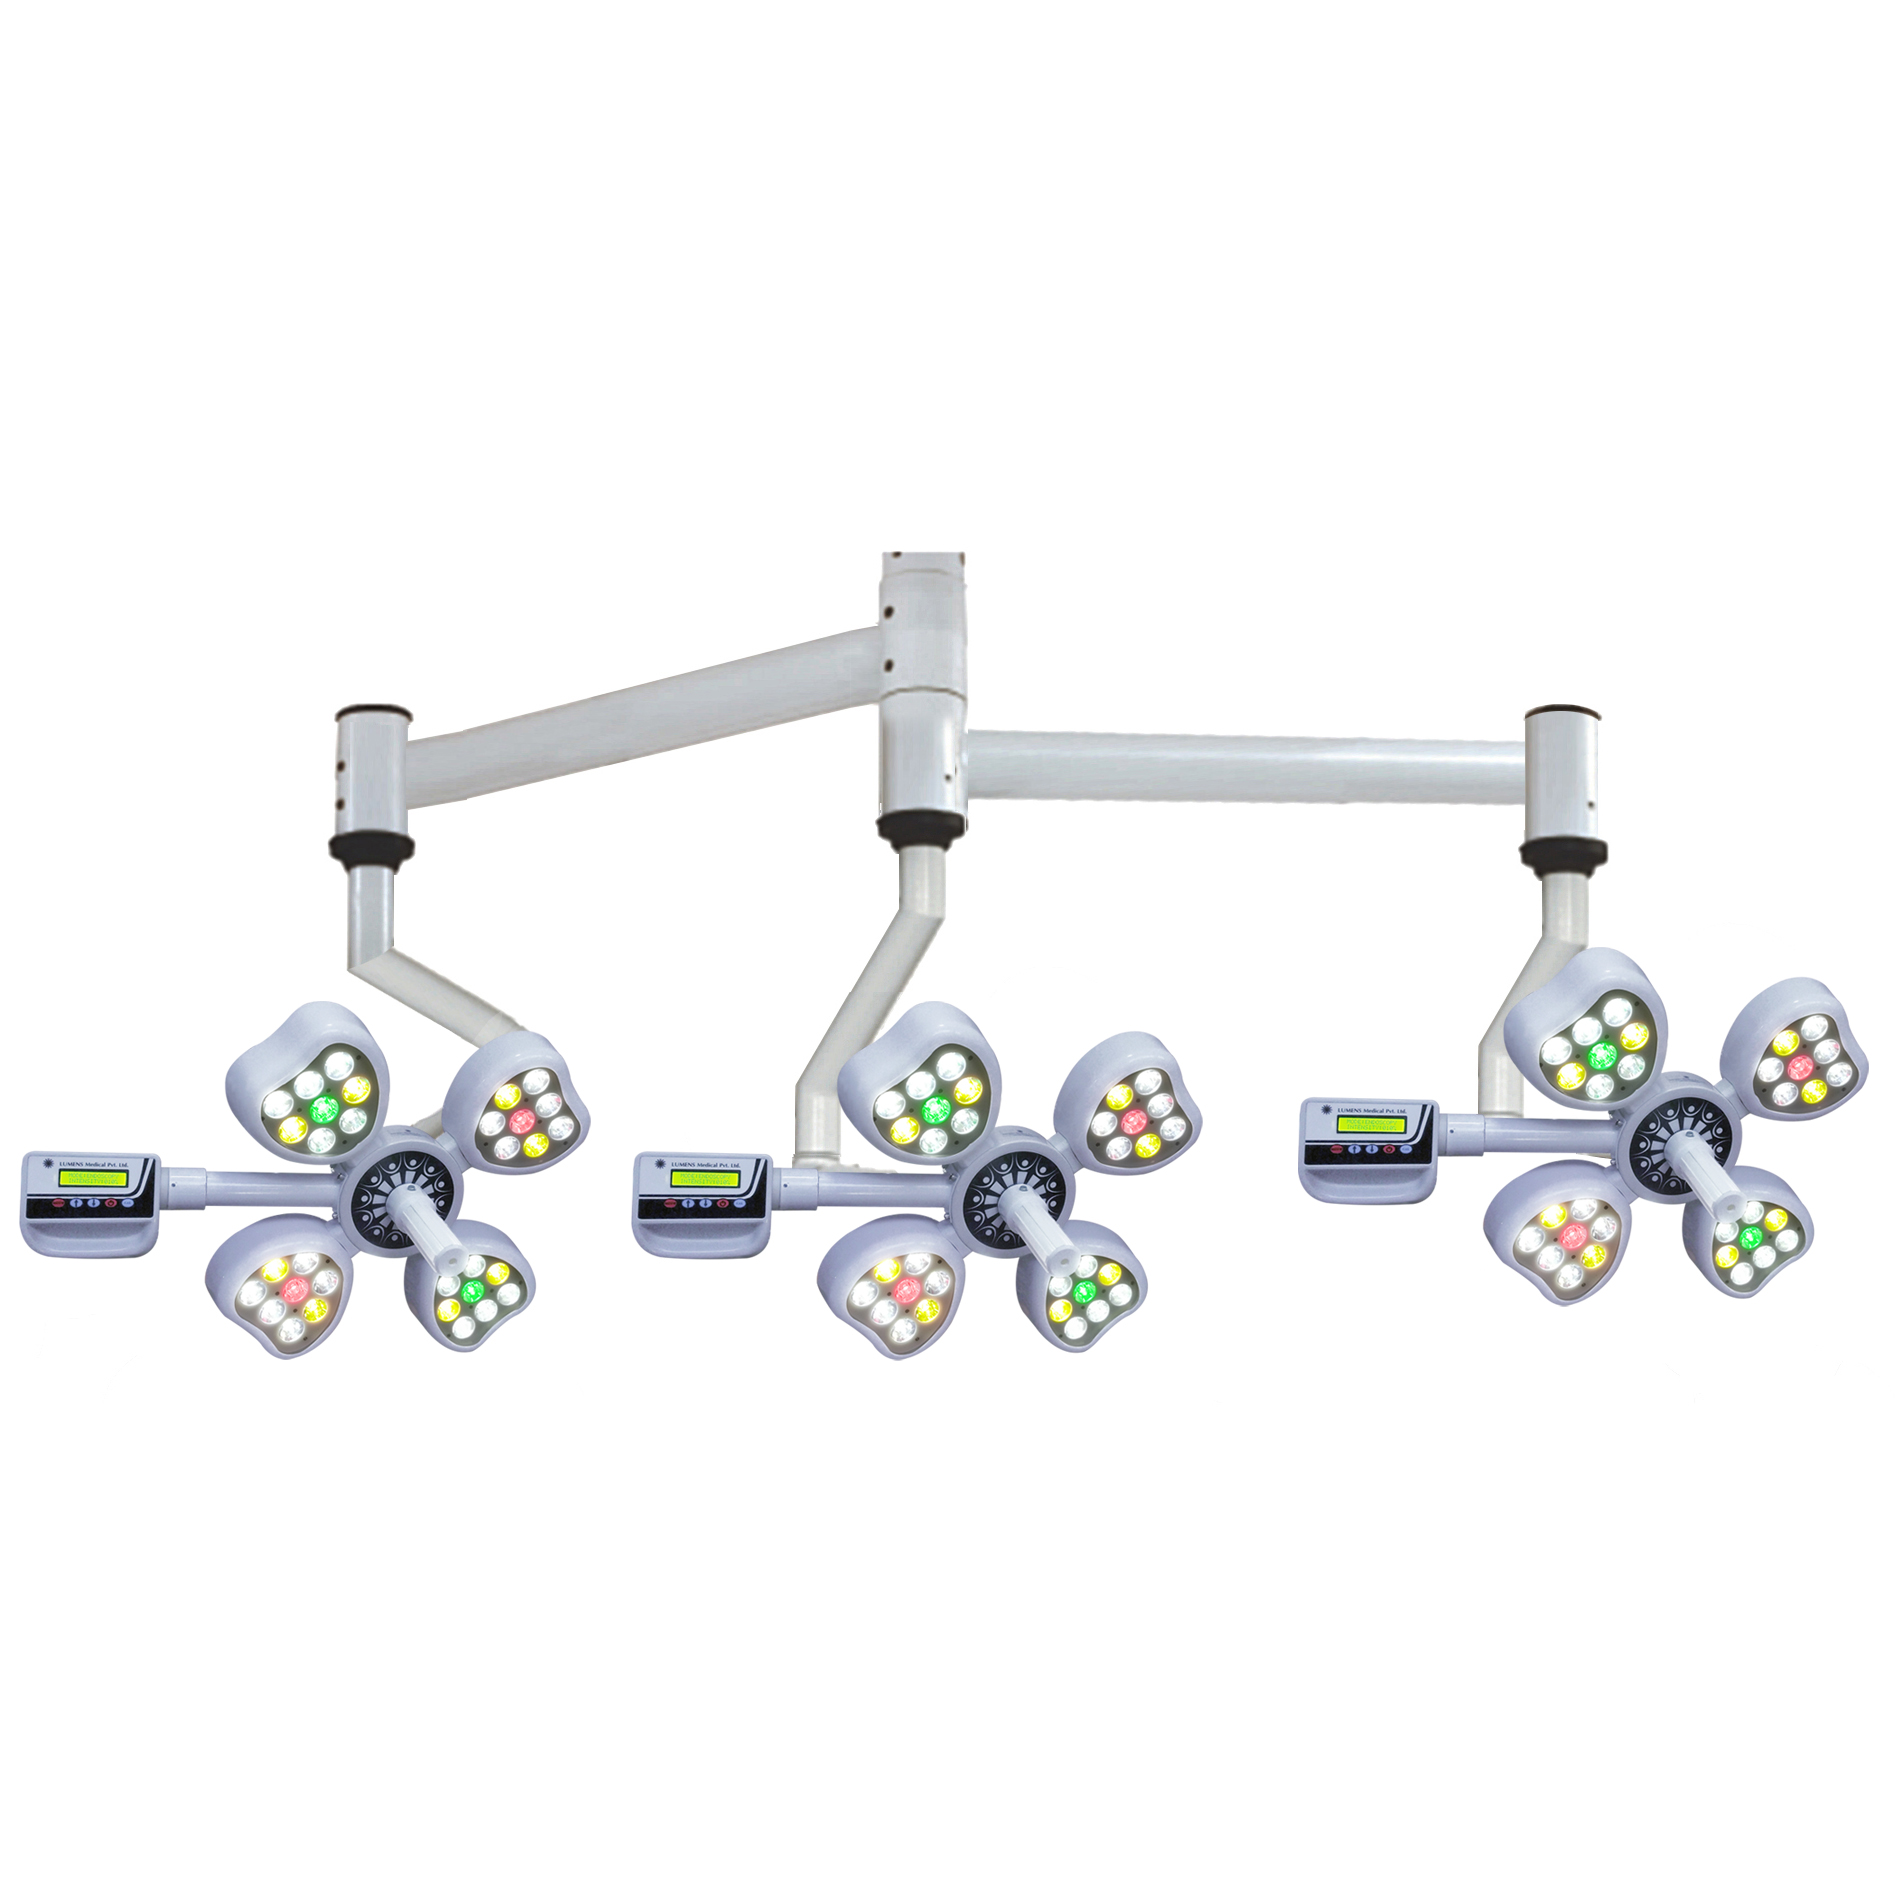 Model Name/Number: Blitz Crescendo-d Ceiling Mounted Surgical